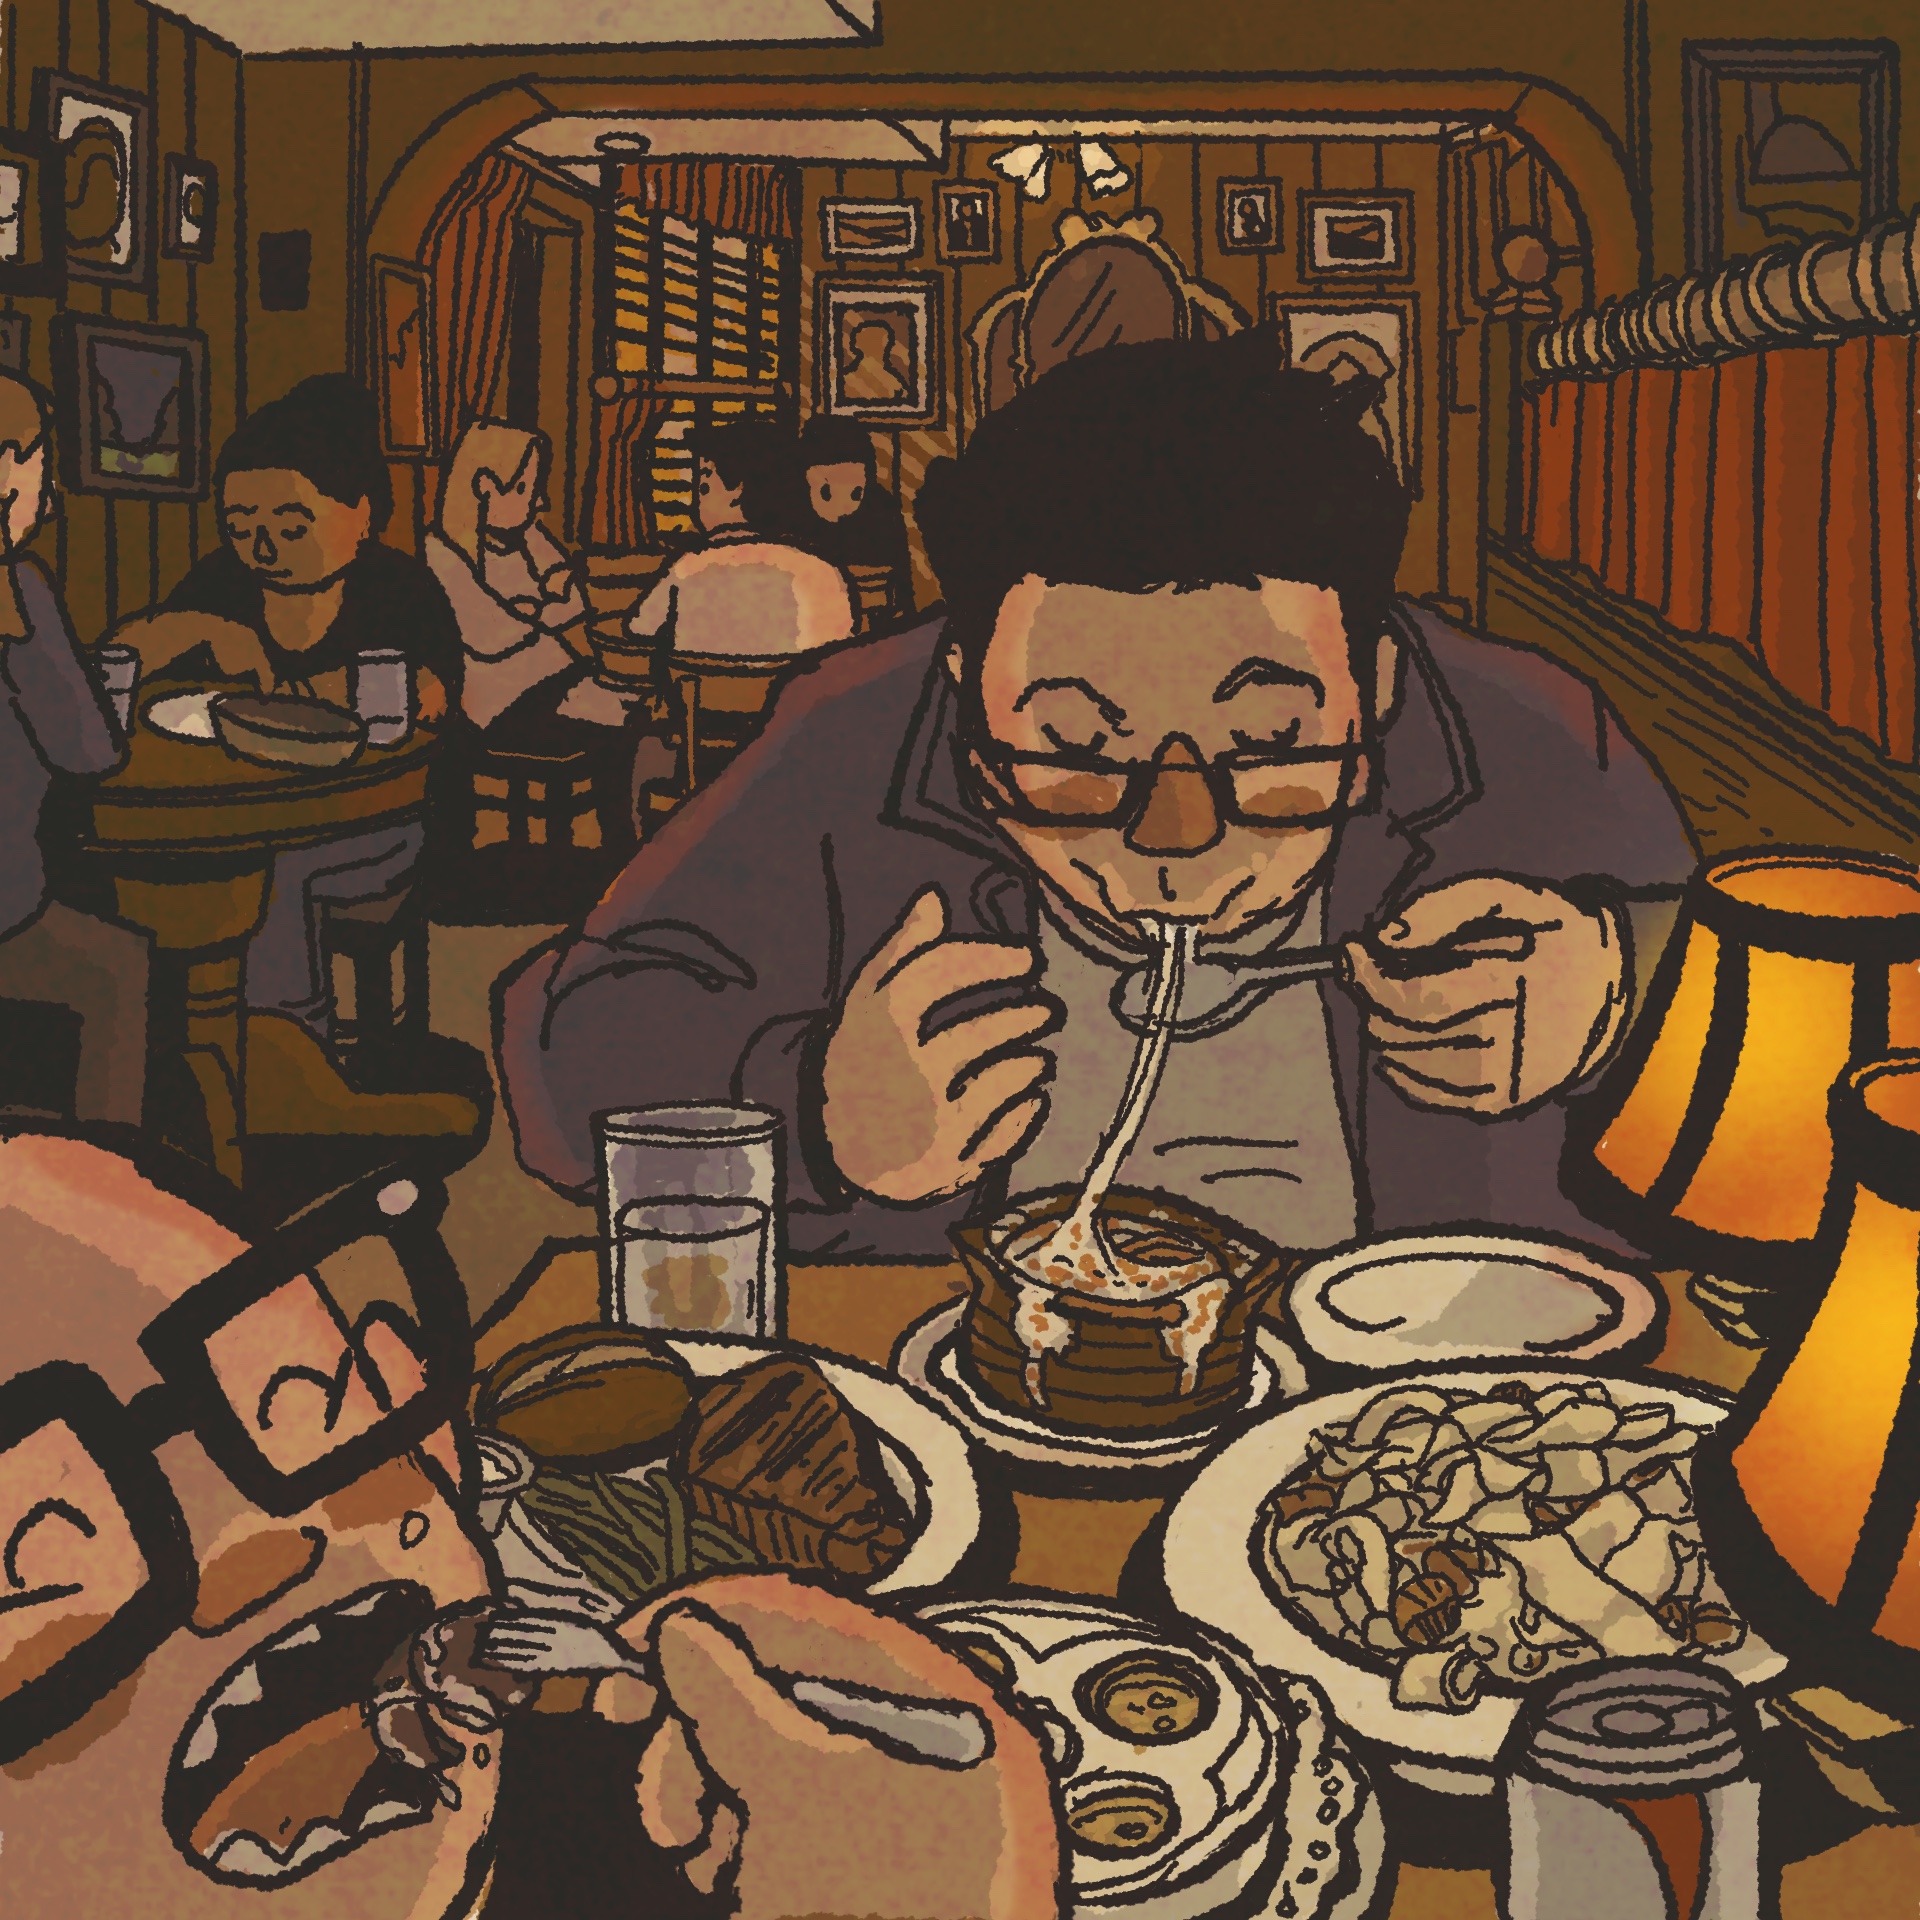 Illustration: One man eats a bowl of French onion soup, pulling up a long strand of melted cheese. Another, in the foreground, forks escargots into his mouth.